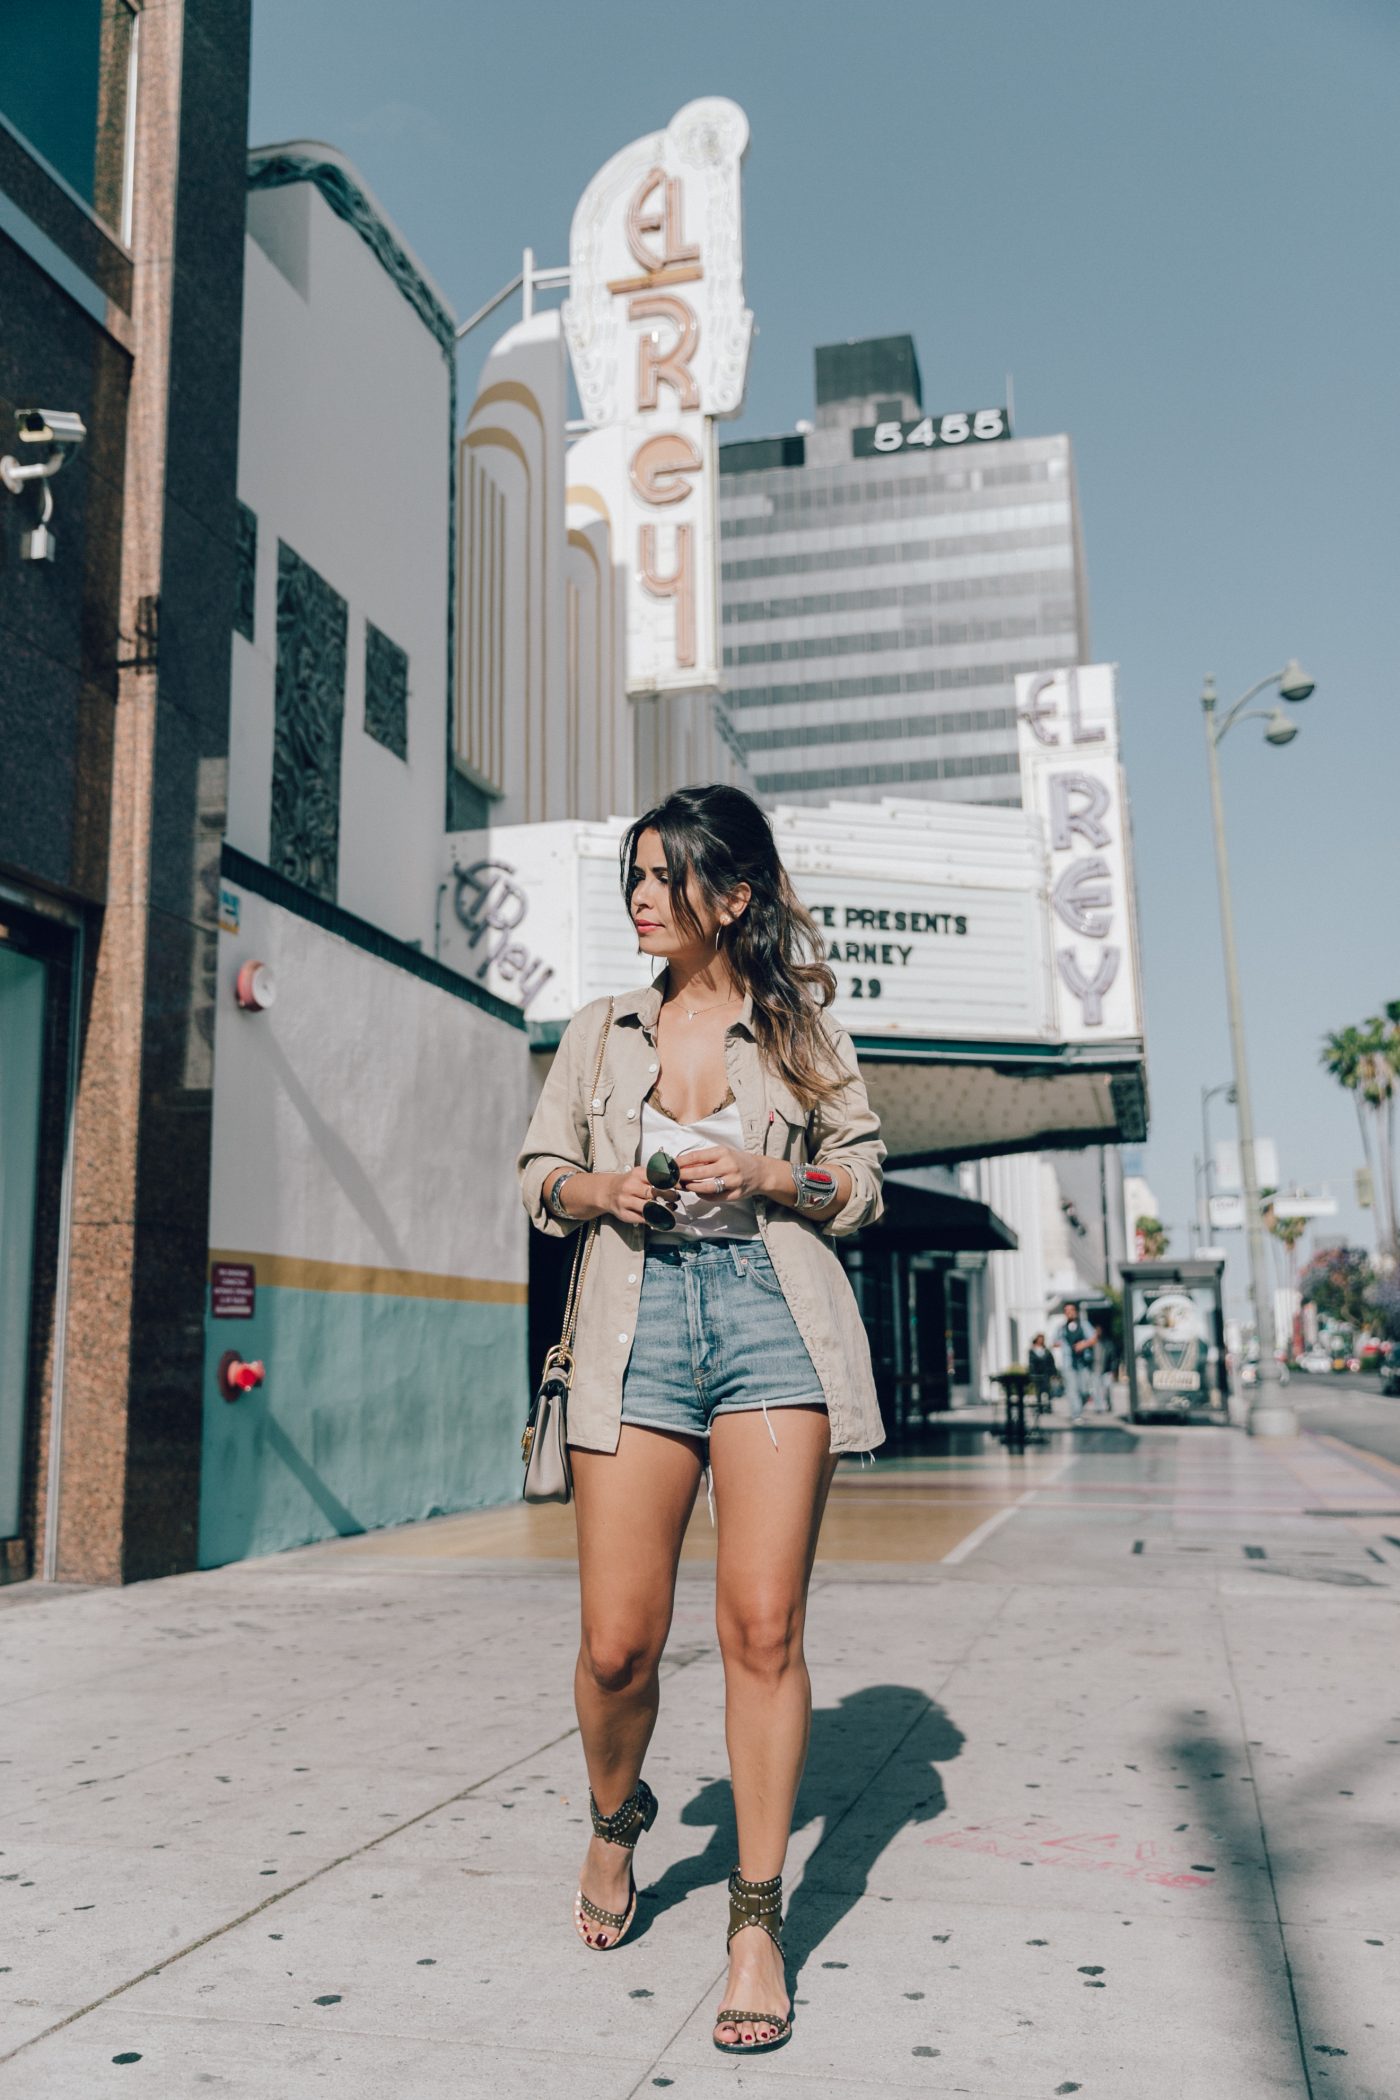 Levis_Shirt-GRLFRND_Denim-Chloe_Bag-Los_Angeles-Shorts-Outfit-Street_Style-Ray_Ban-Street_Style-Collage_Vintage-18